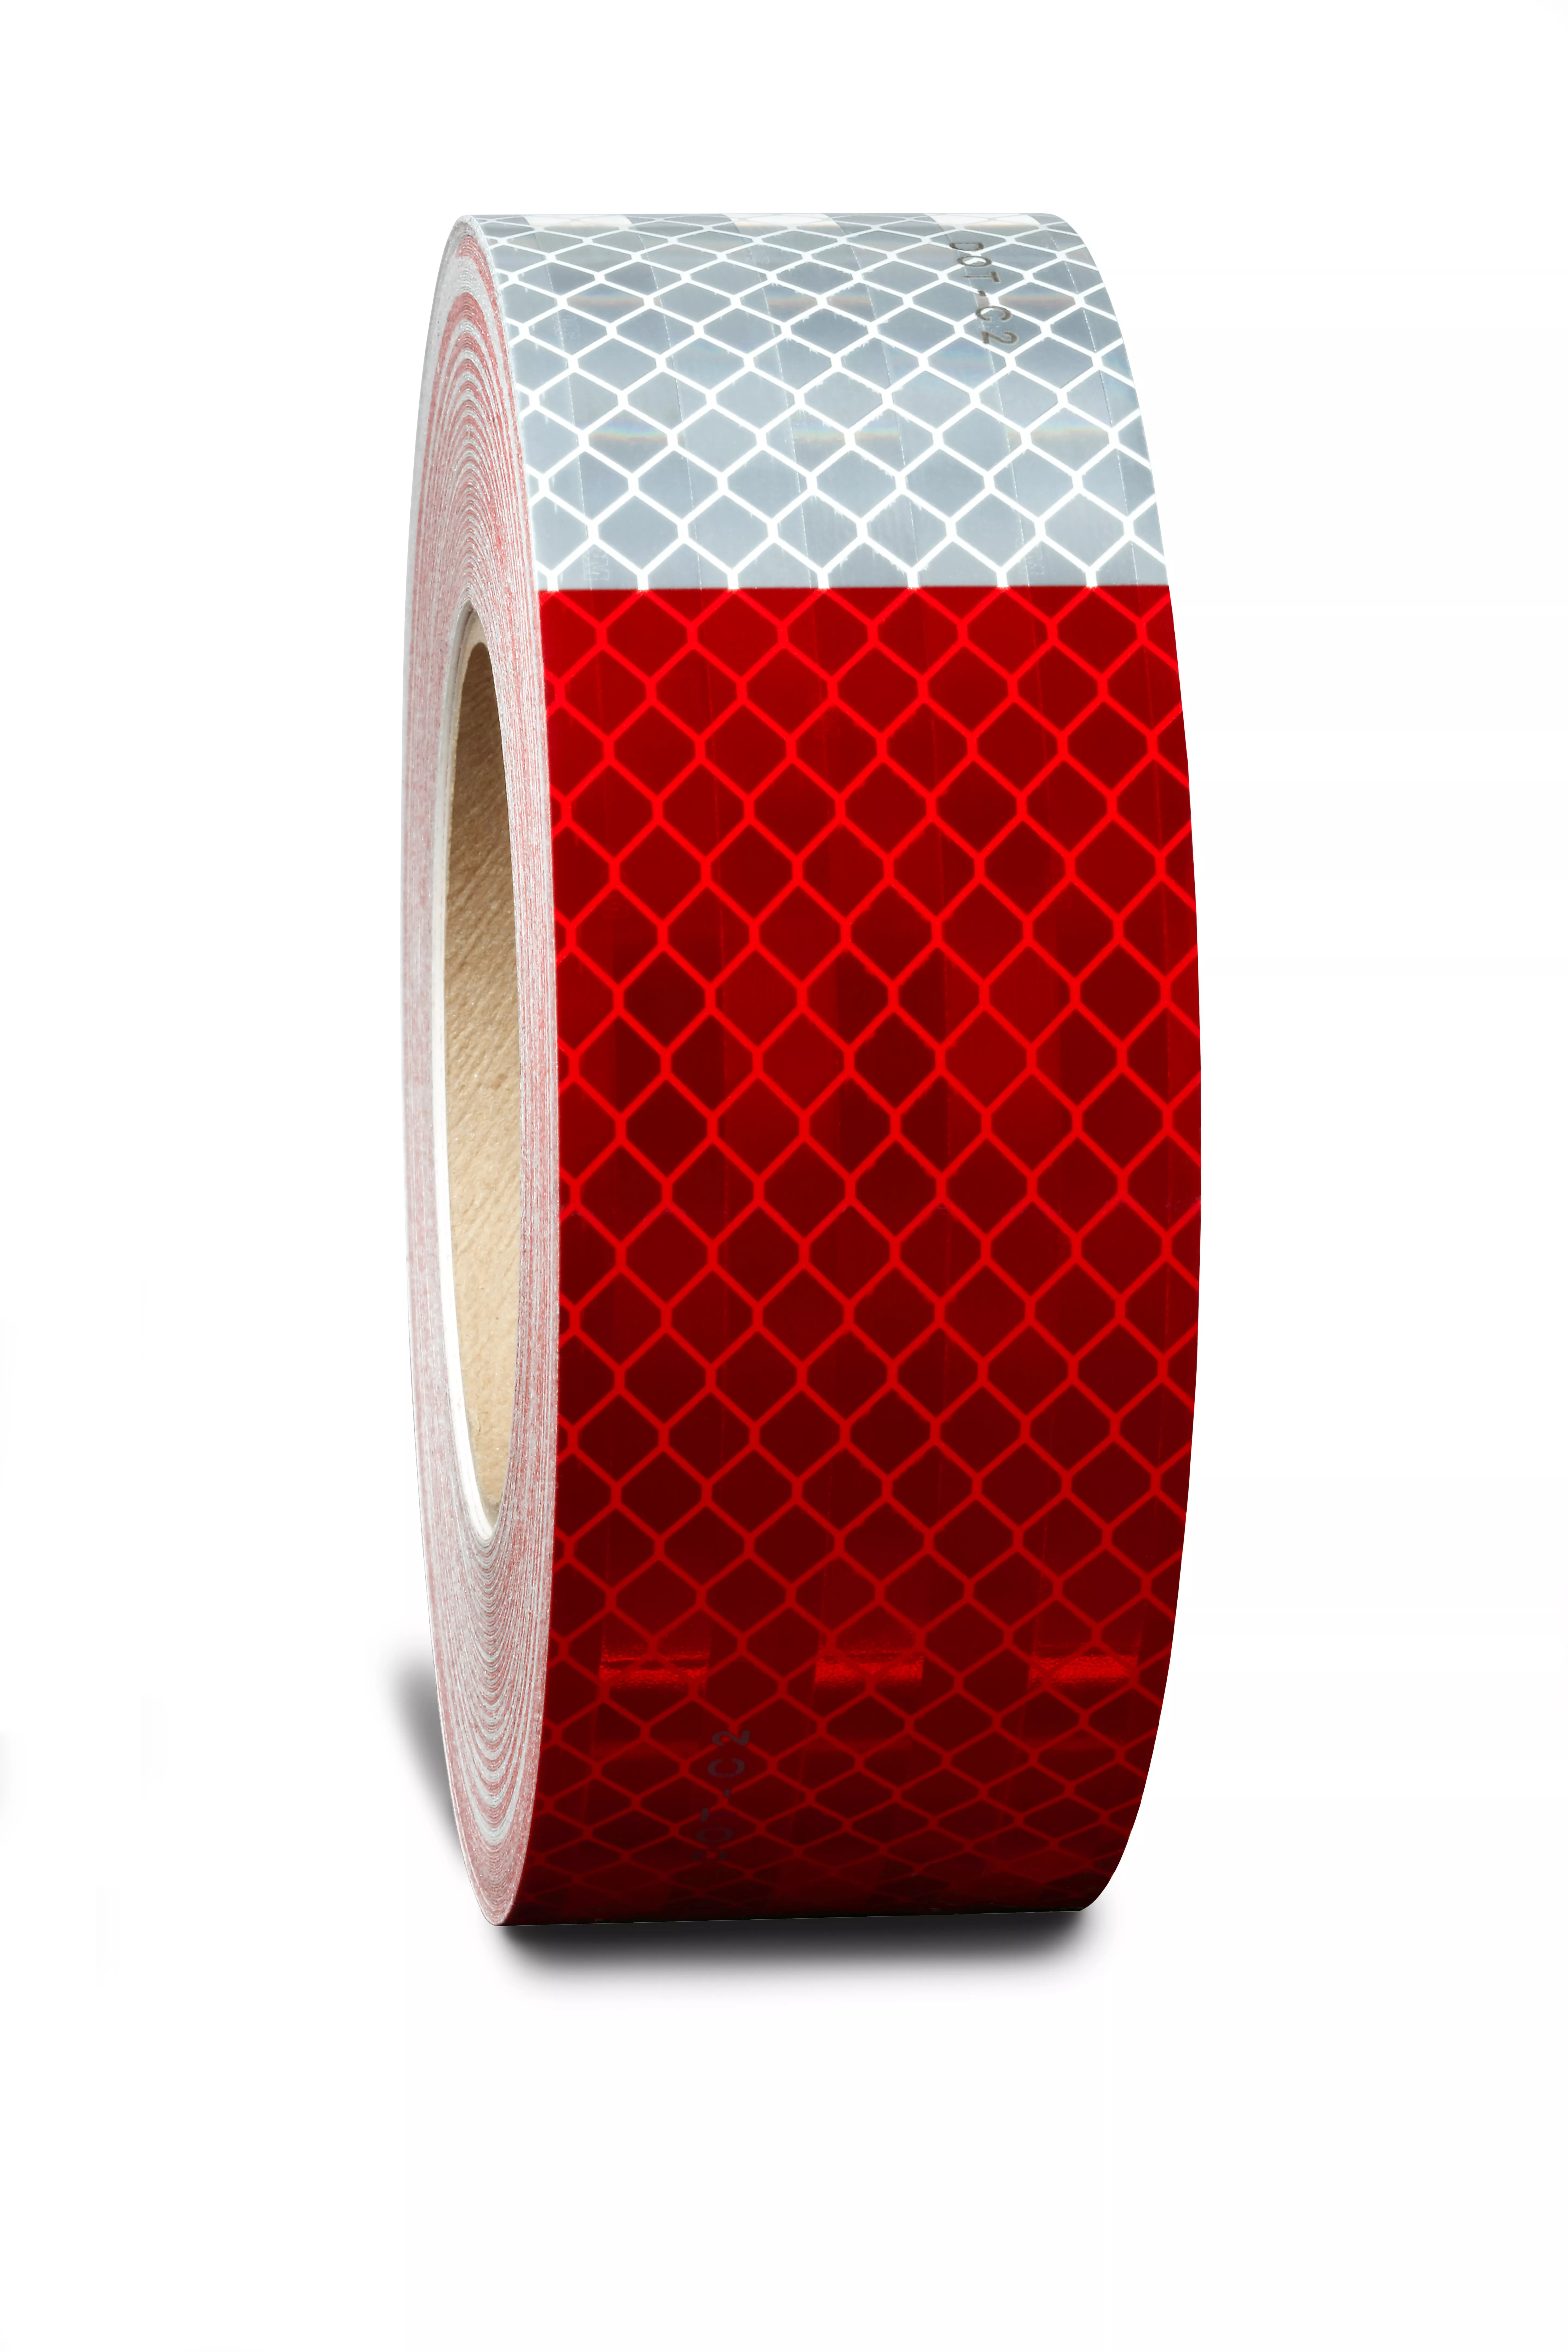 Product Number 913-326 | 3M™ Flexible Prismatic Conspicuity Markings 913-326NL Red/White